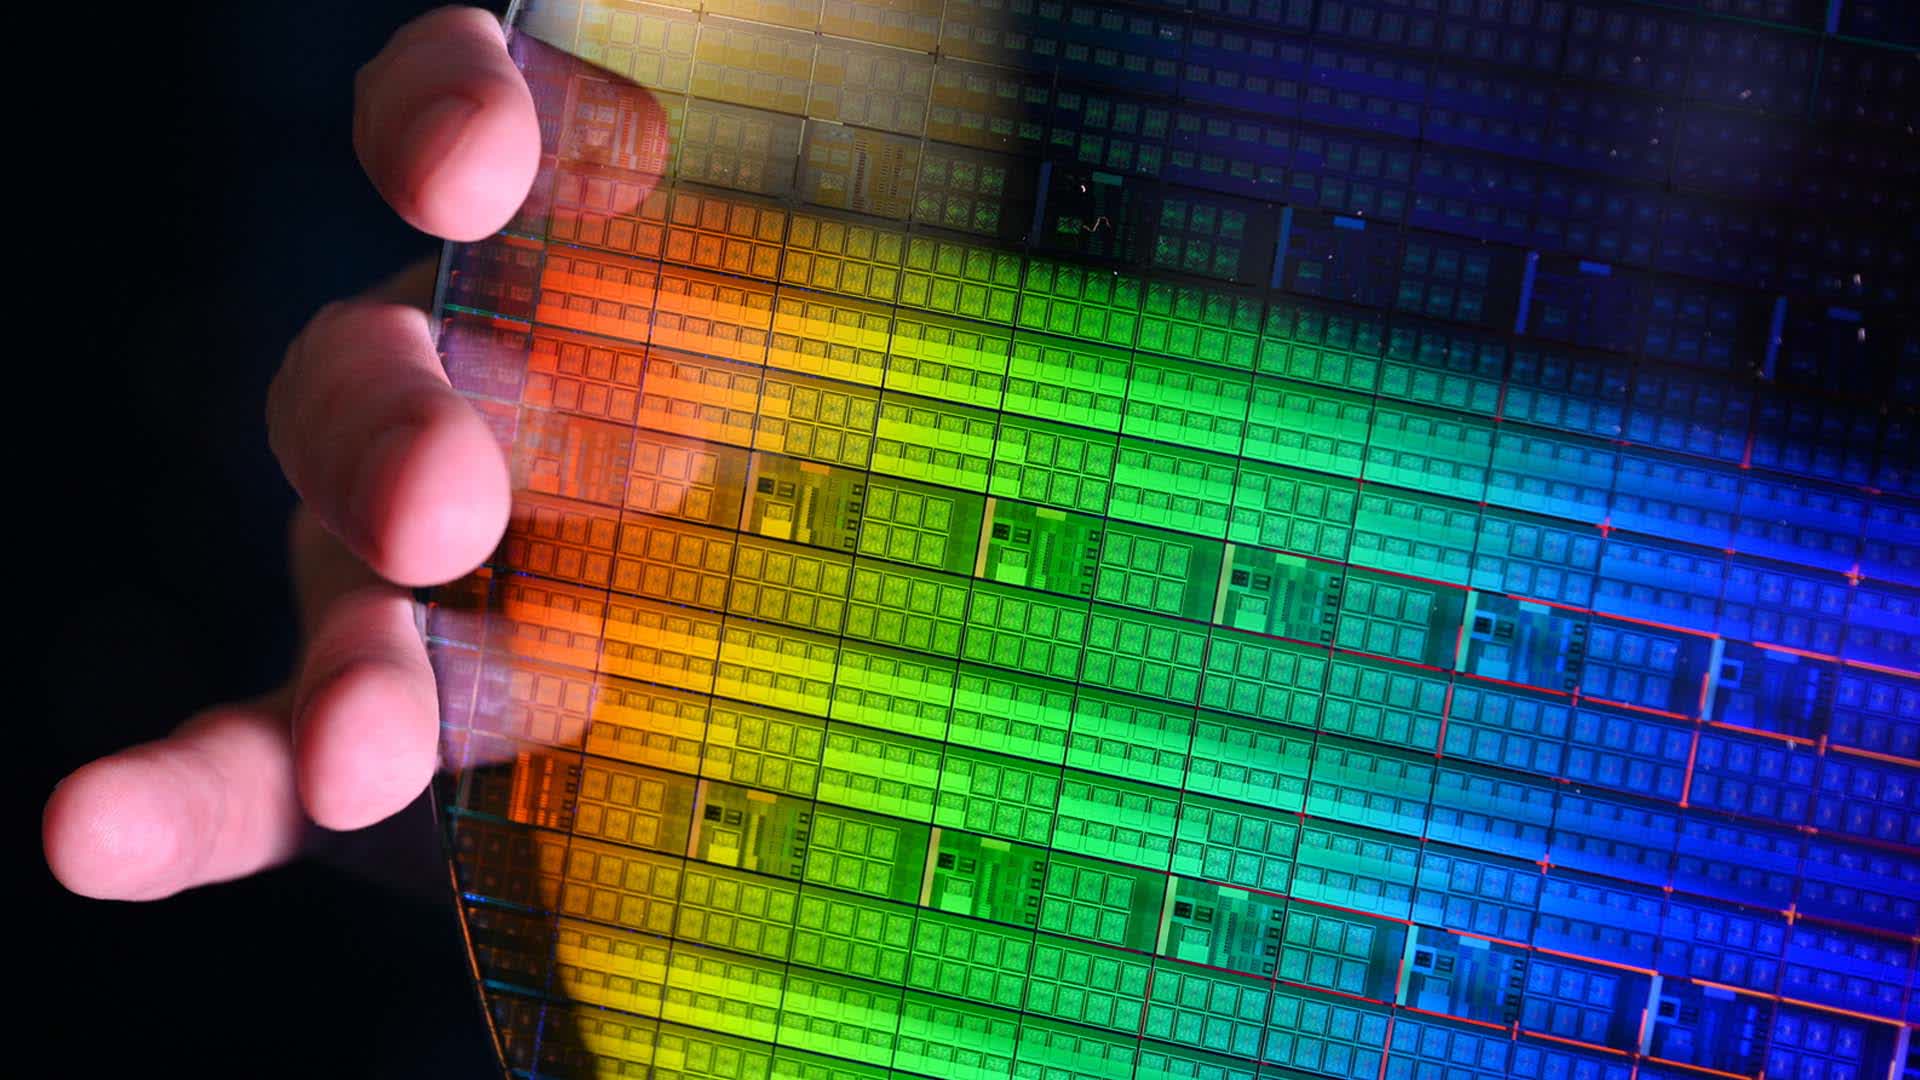 New Intel research charts a course to trillion-transistor chip designs by 2030